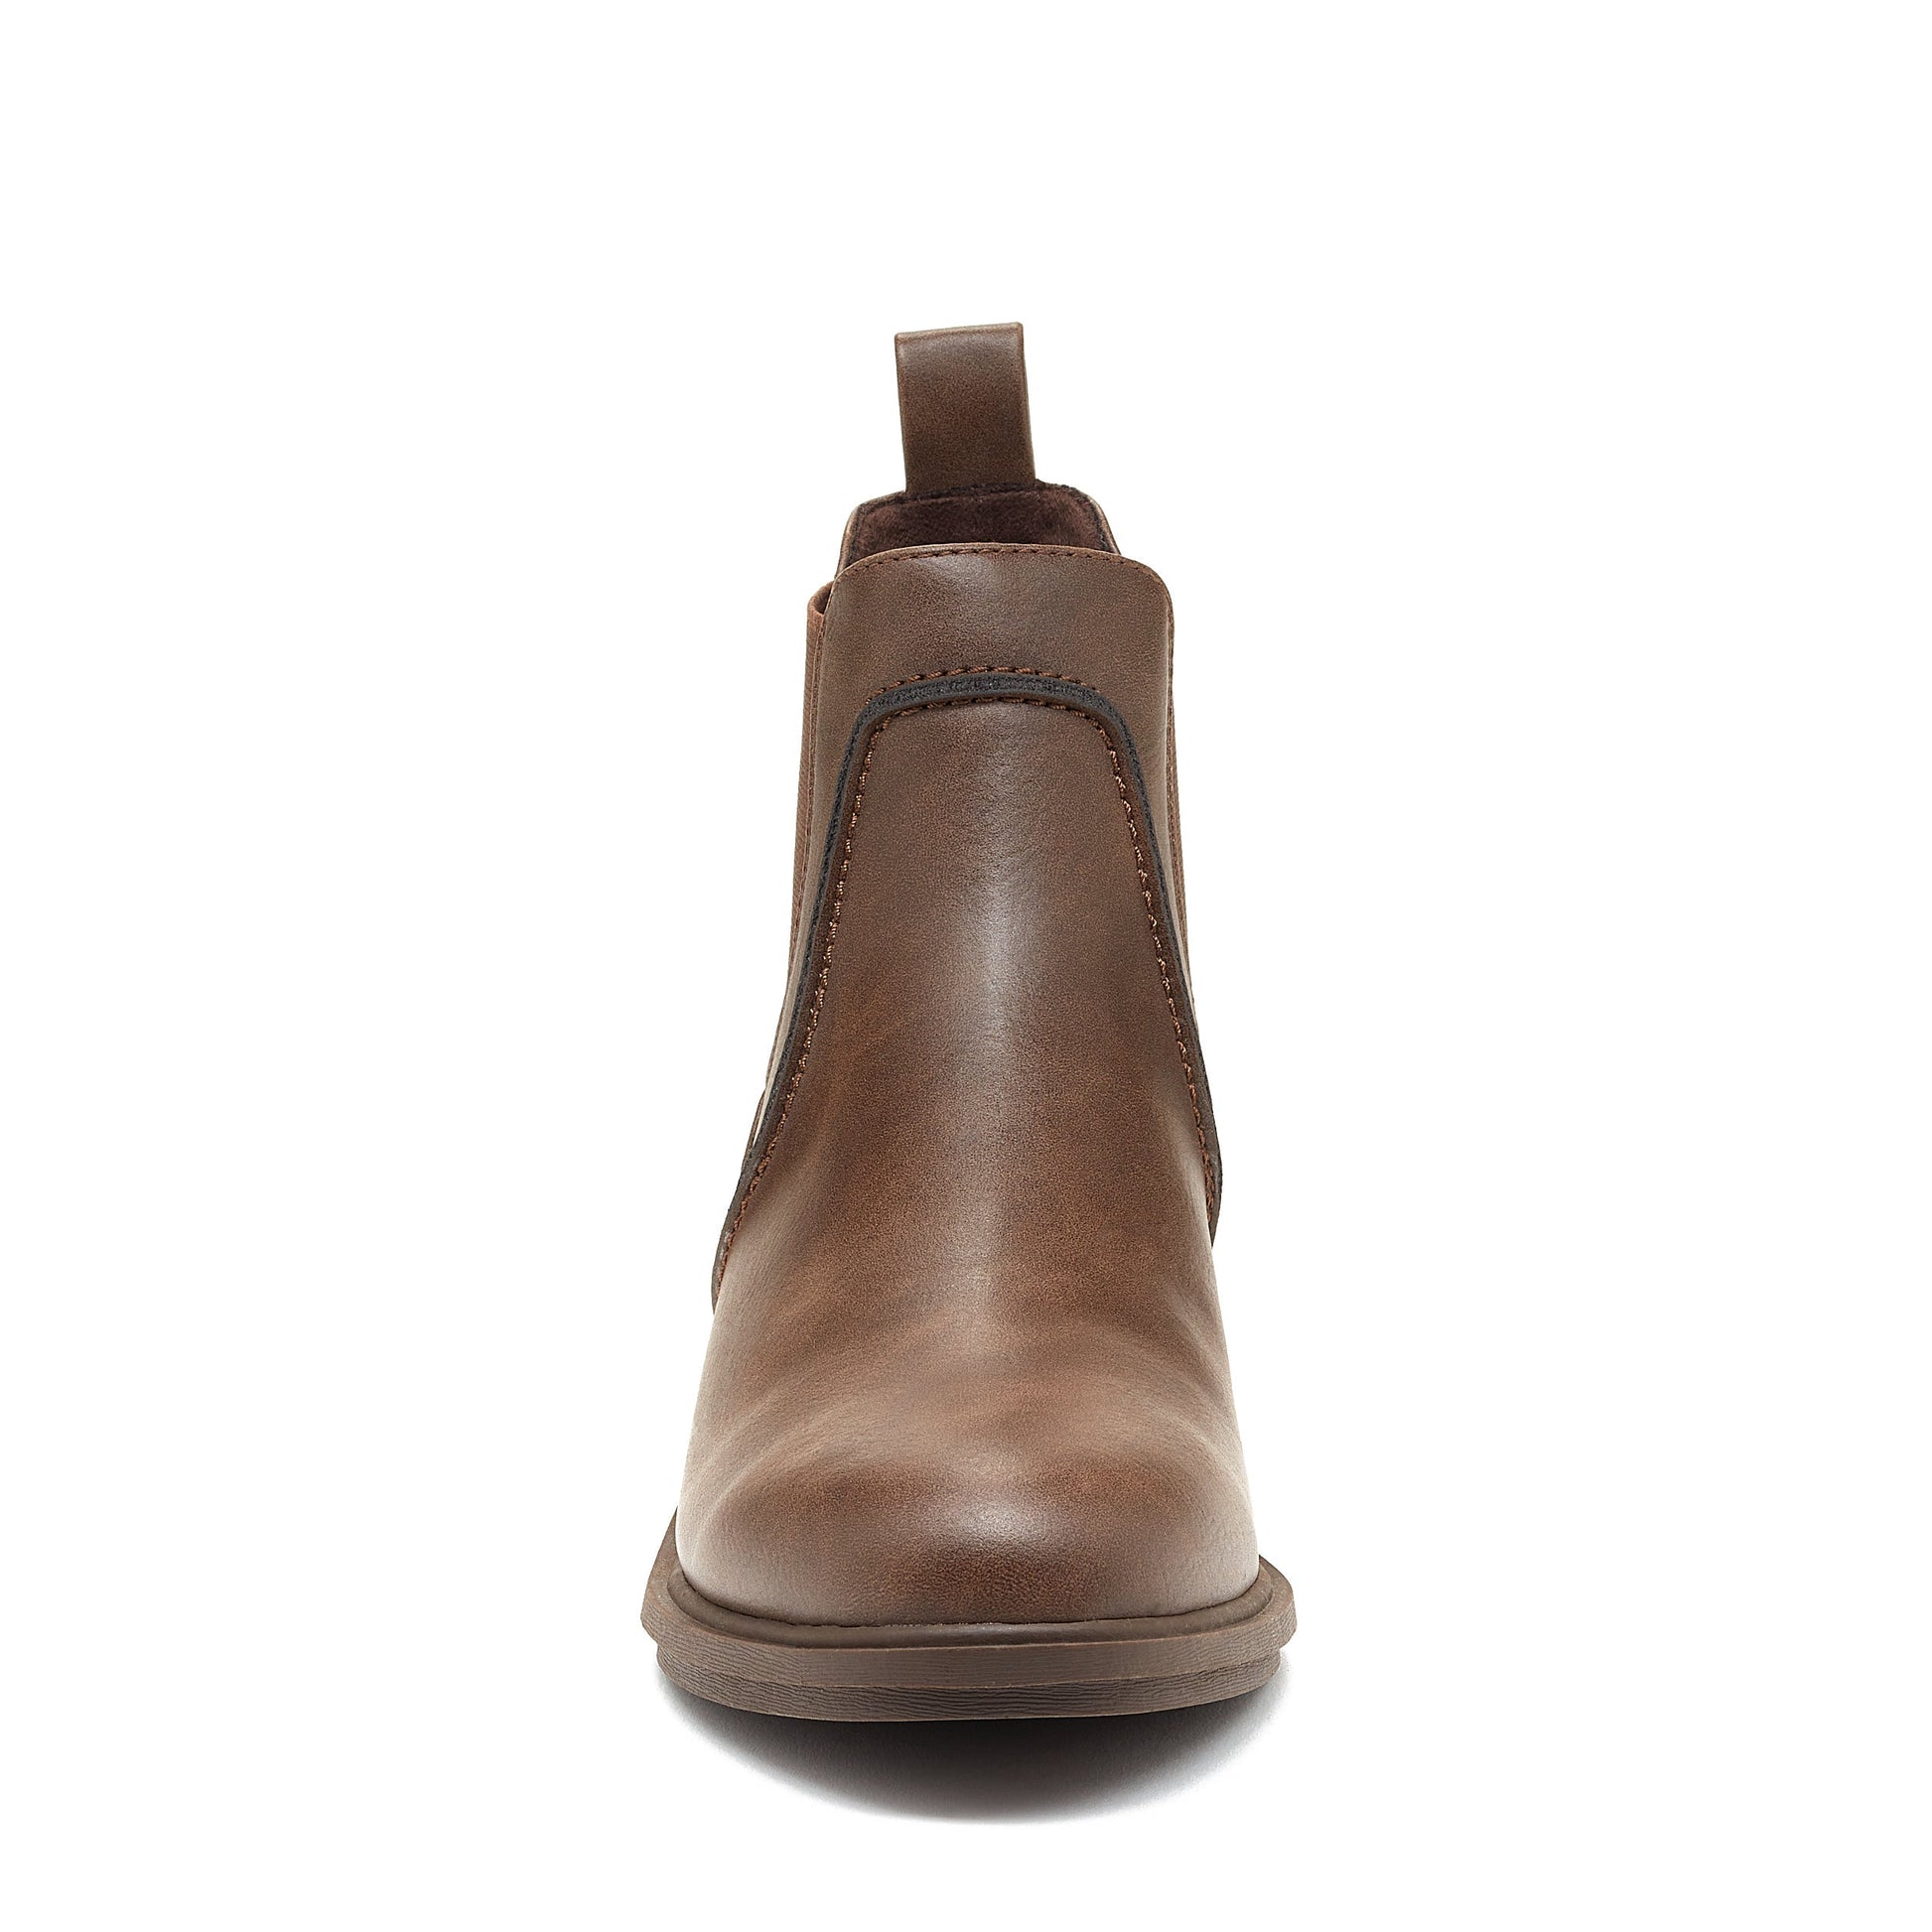 Rocket Dog® Women's Gilly Brown Chelsea Boot